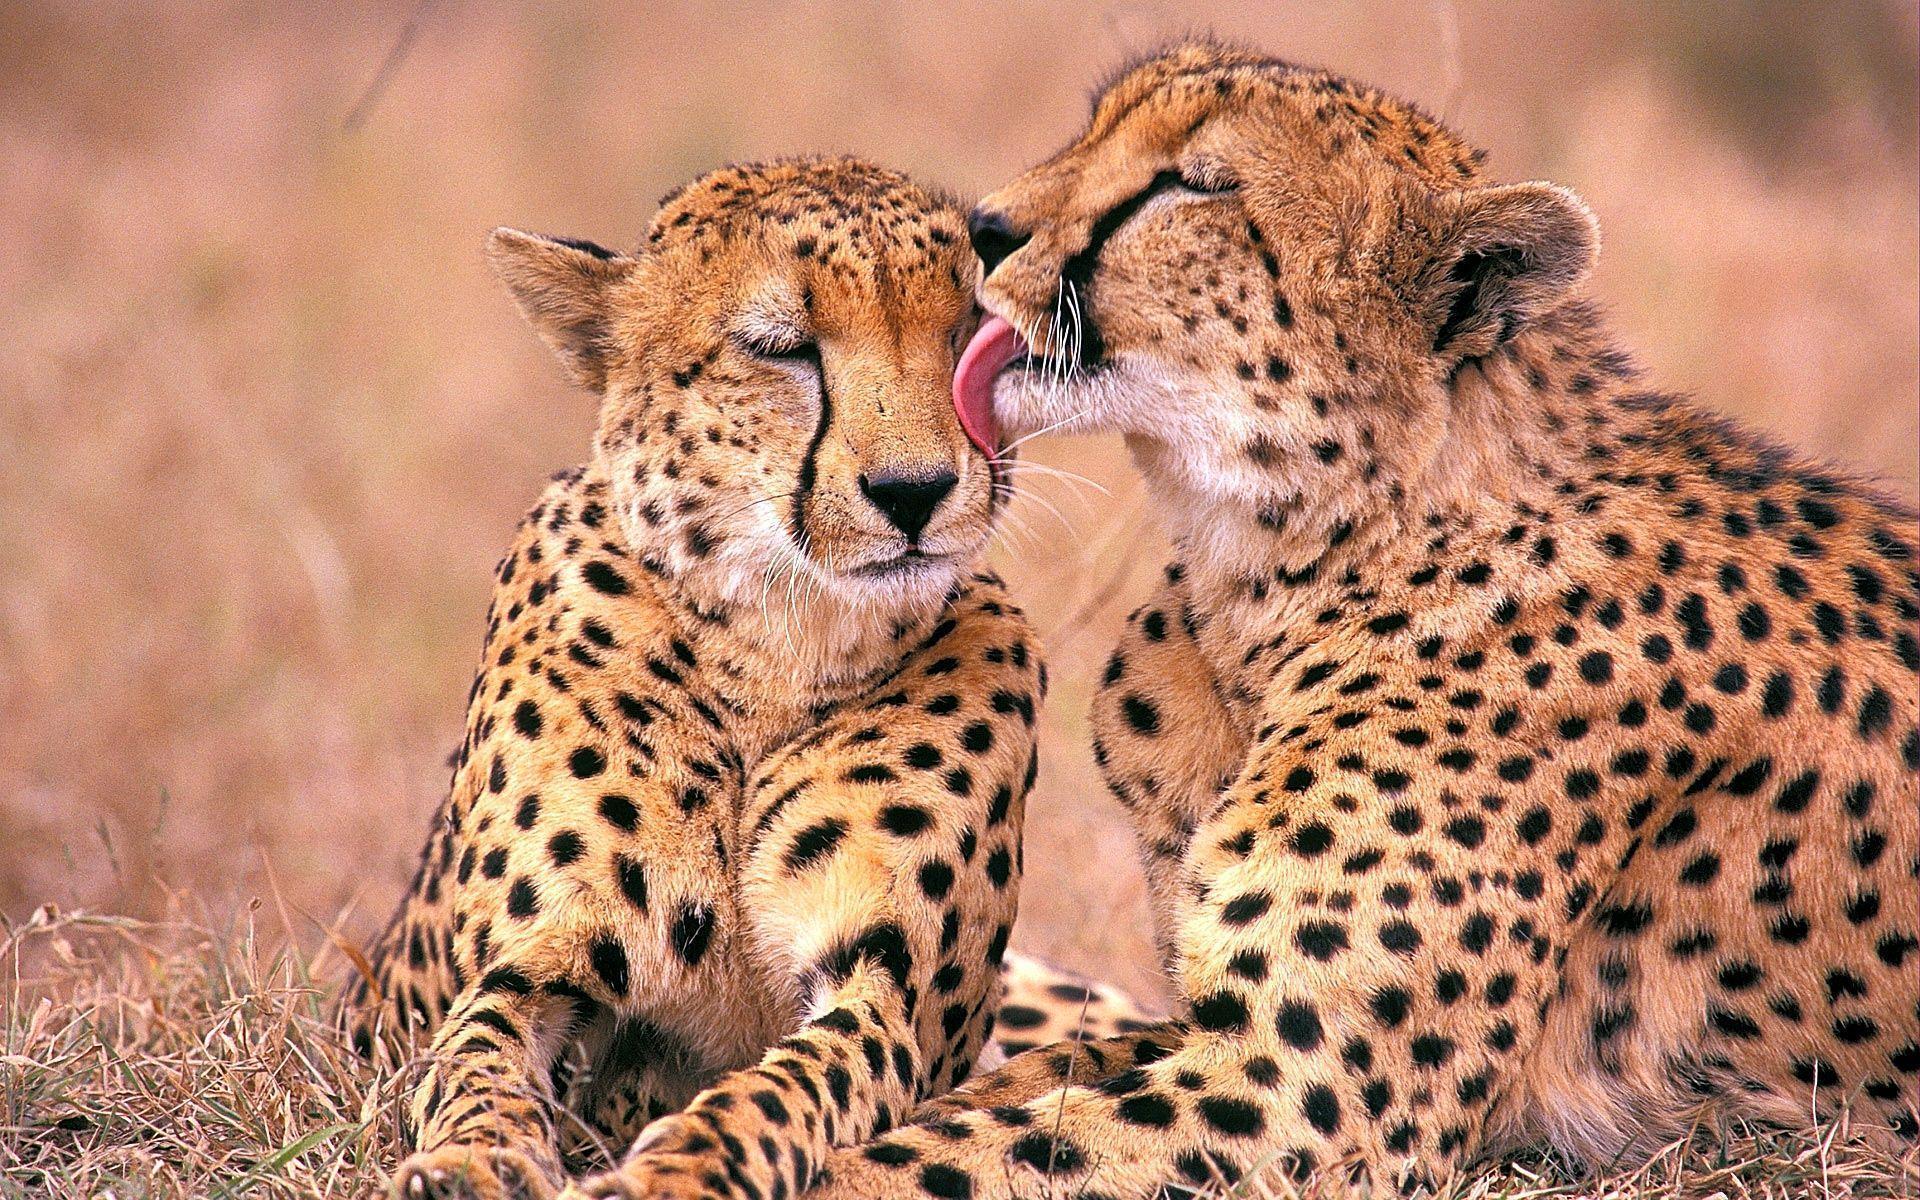 South African Cheetahs Wallpaper Picture Of Cheetahs Wallpaper & Background Download